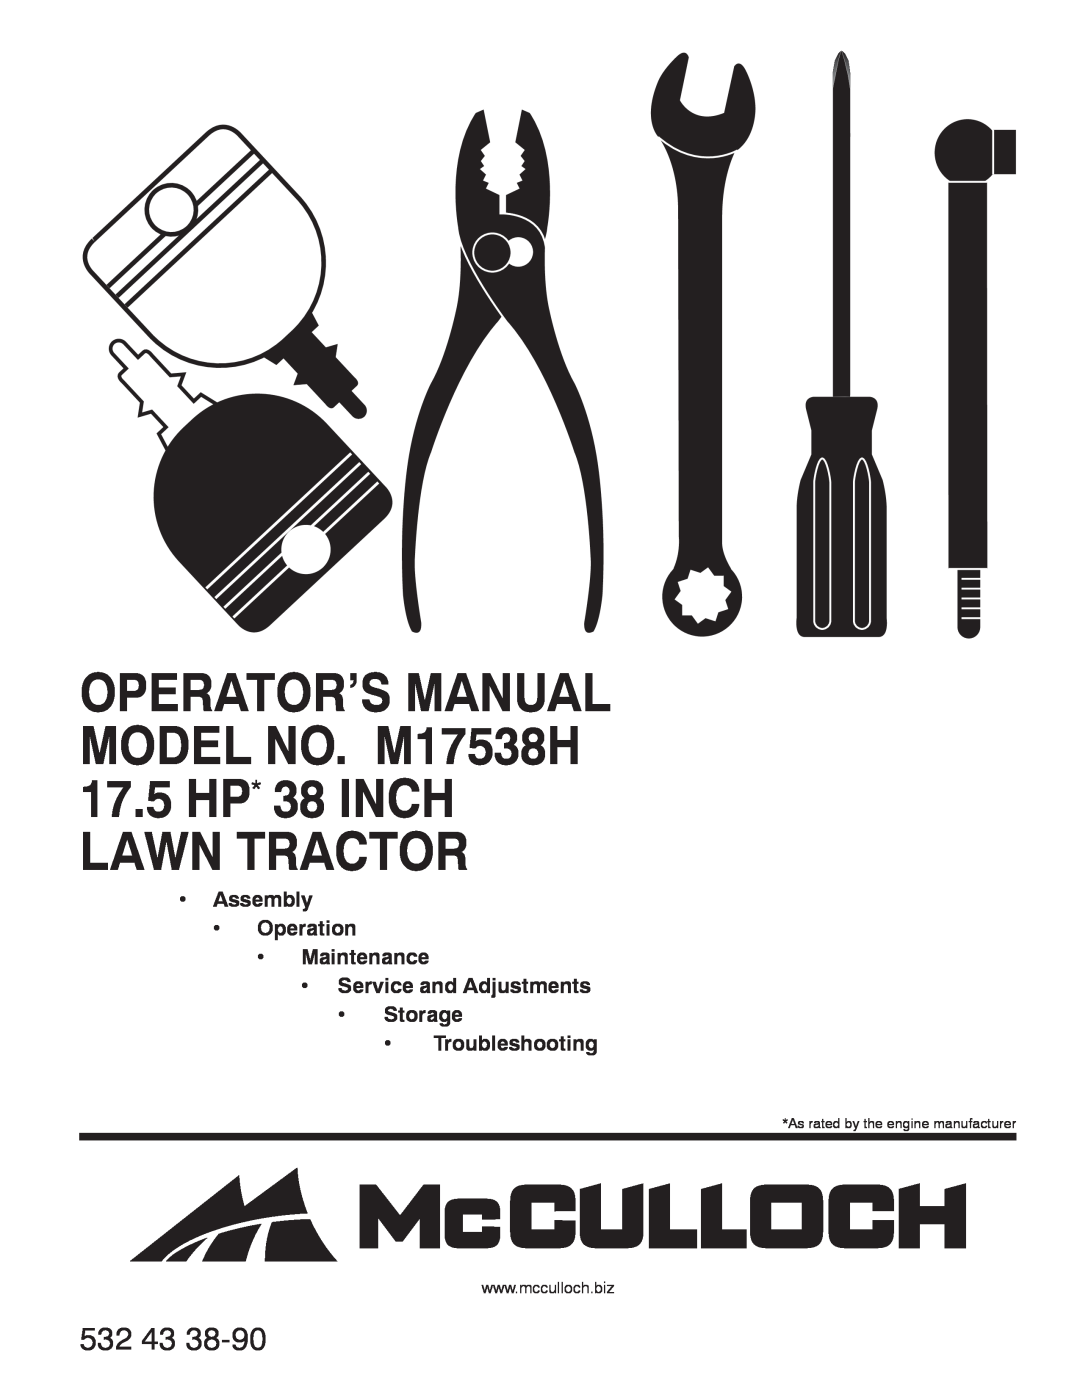 McCulloch manual OPERATOR’S MANUAL MODEL NO. M17538H, 17.5HP* 38 INCH LAWN TRACTOR, 532, Assembly Operation Maintenance 